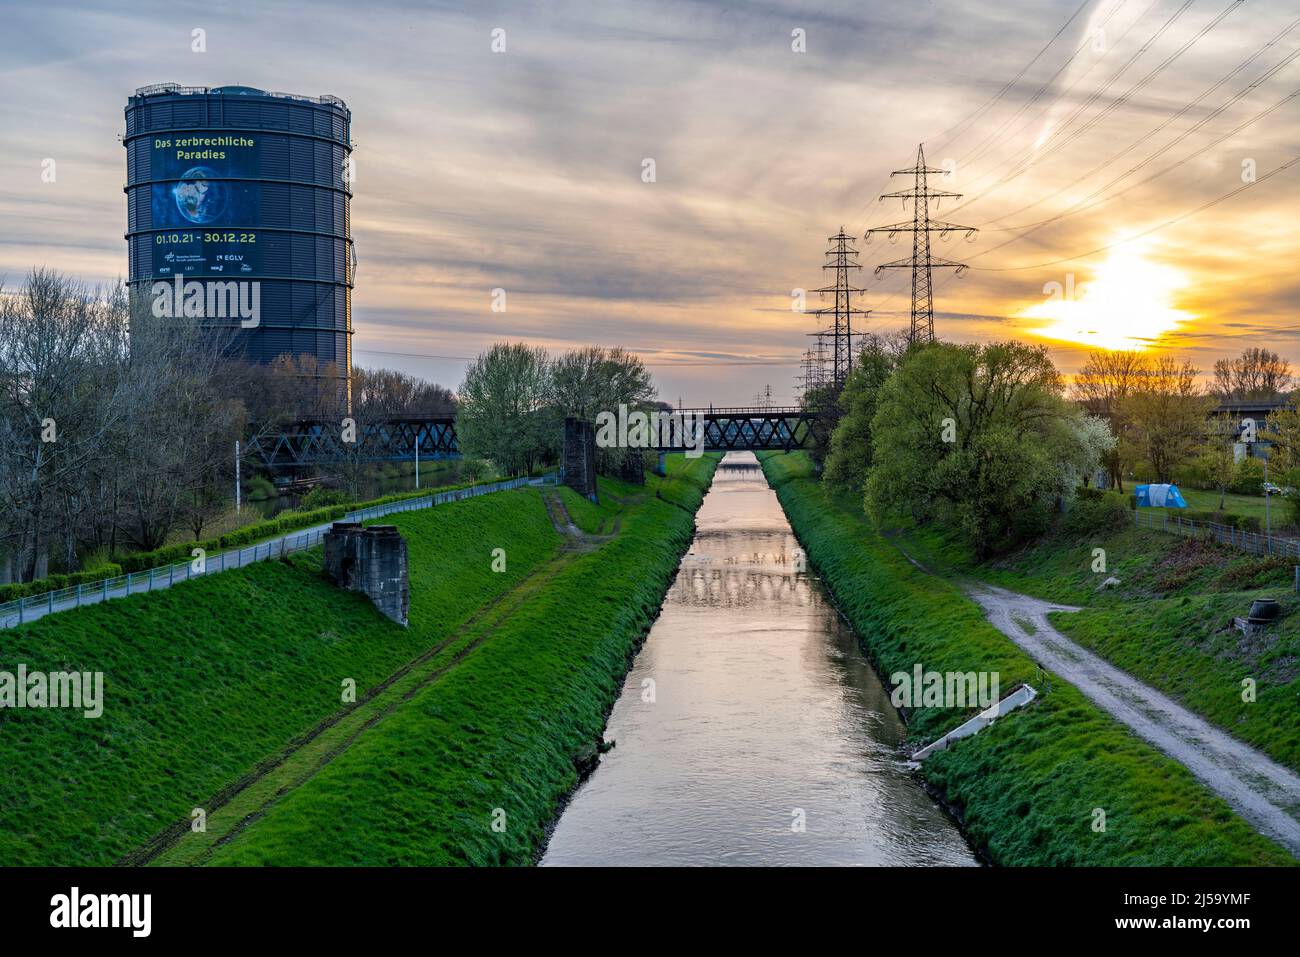 Neue Mitte Oberhausen, Gasometer exhibition hall, after renovation, Emscher River canal, evening lighting, exhibition The Fragile Paradise, NRW, Germa Stock Photo